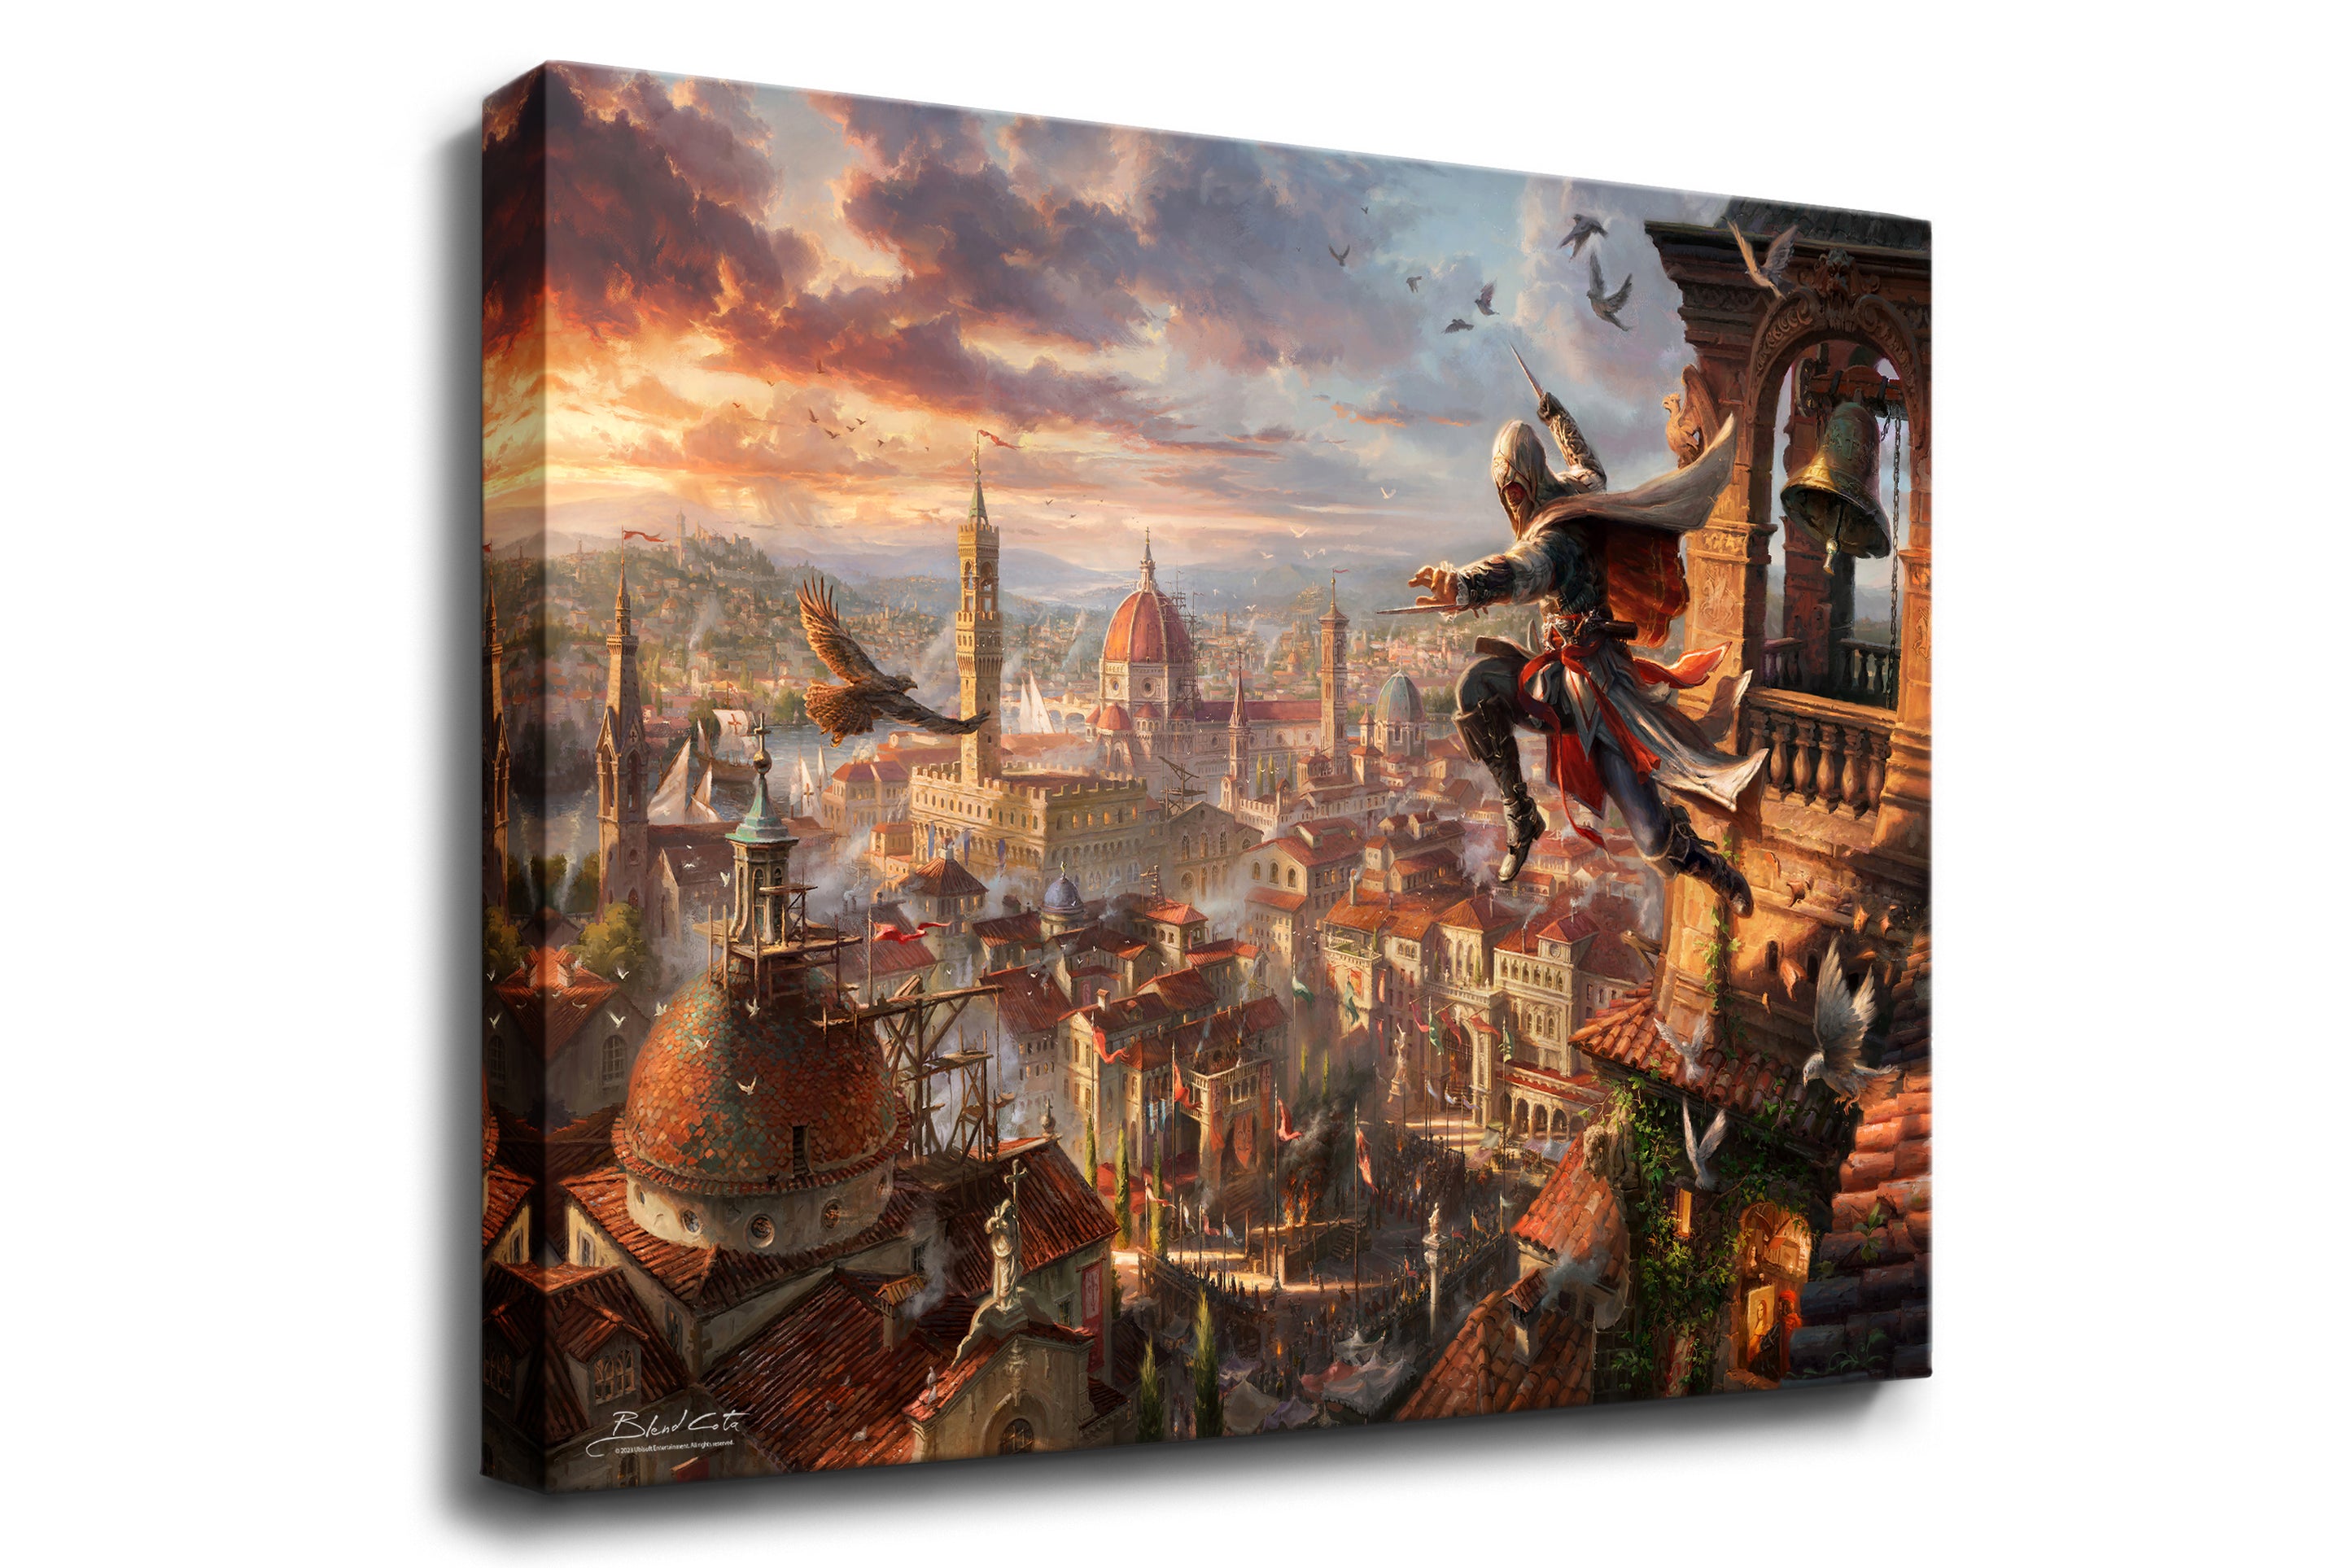 
                  
                    Gallery wrapped art print on canvas of Assassin's Creed Florence and Ezio Auditore meticulously designed and painted with intricate details in a realistic style.
                  
                